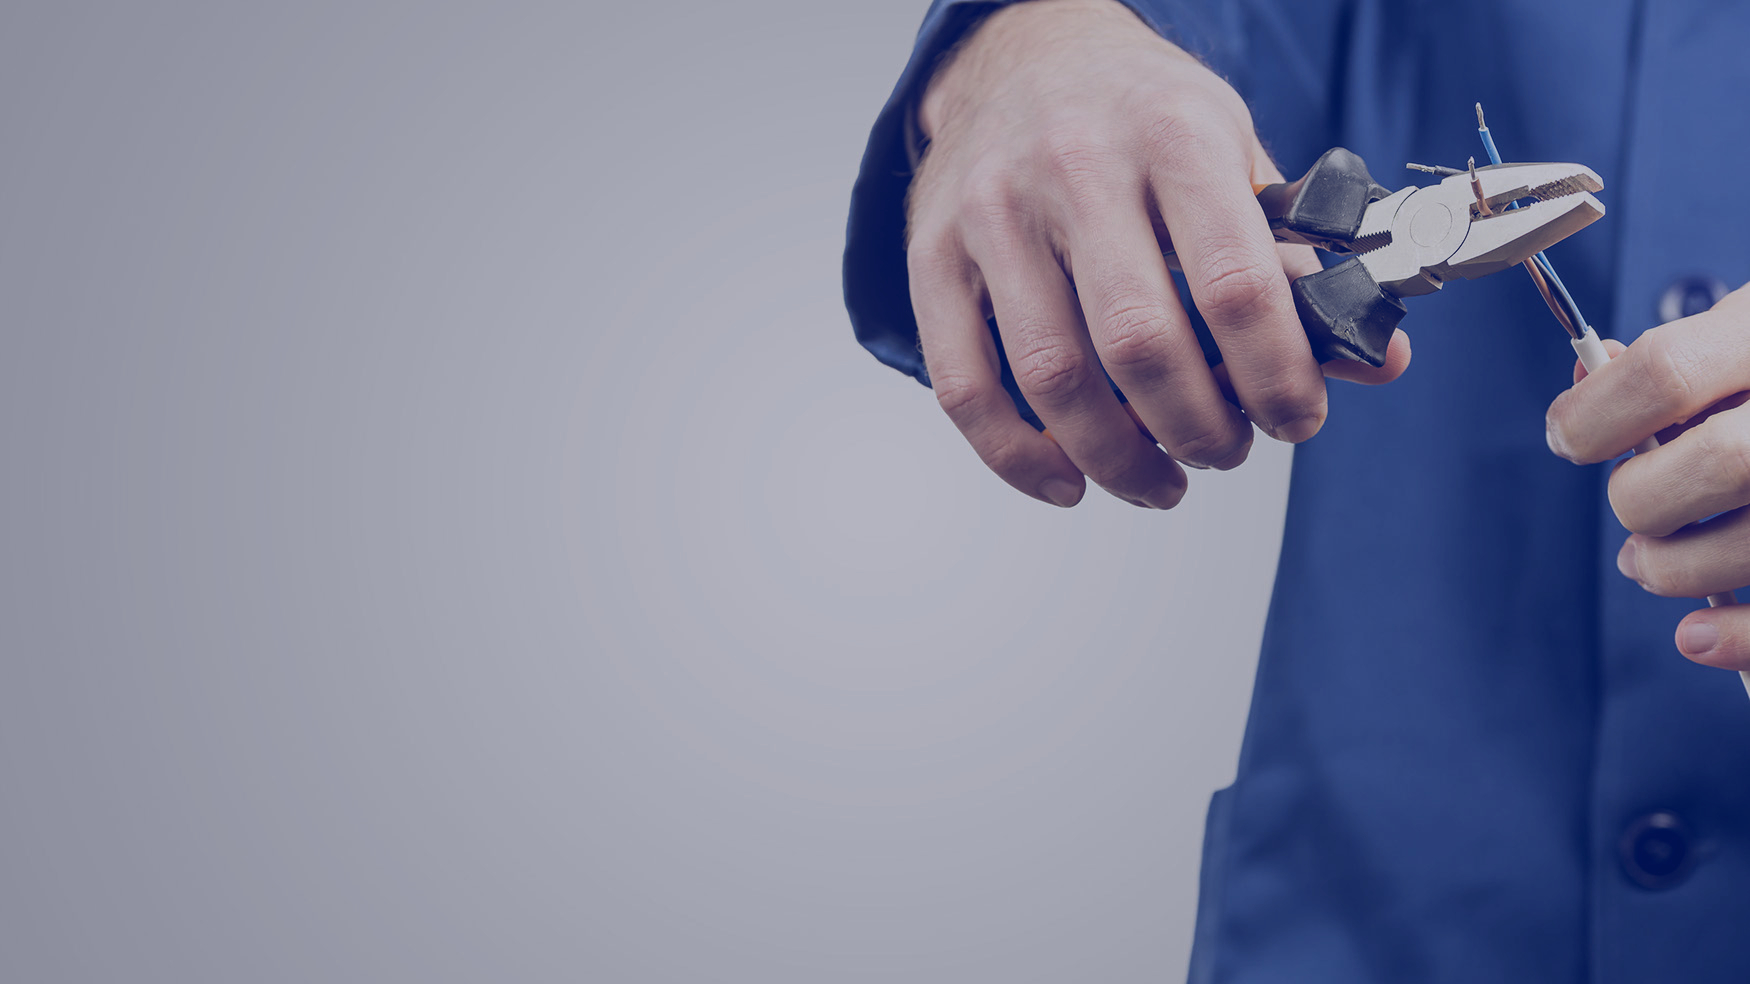 Workman or electrician repairing an electrical cable with a pair of pliers to restore supply to the house, close up view of his hands in blue overalls on grey with copyspace